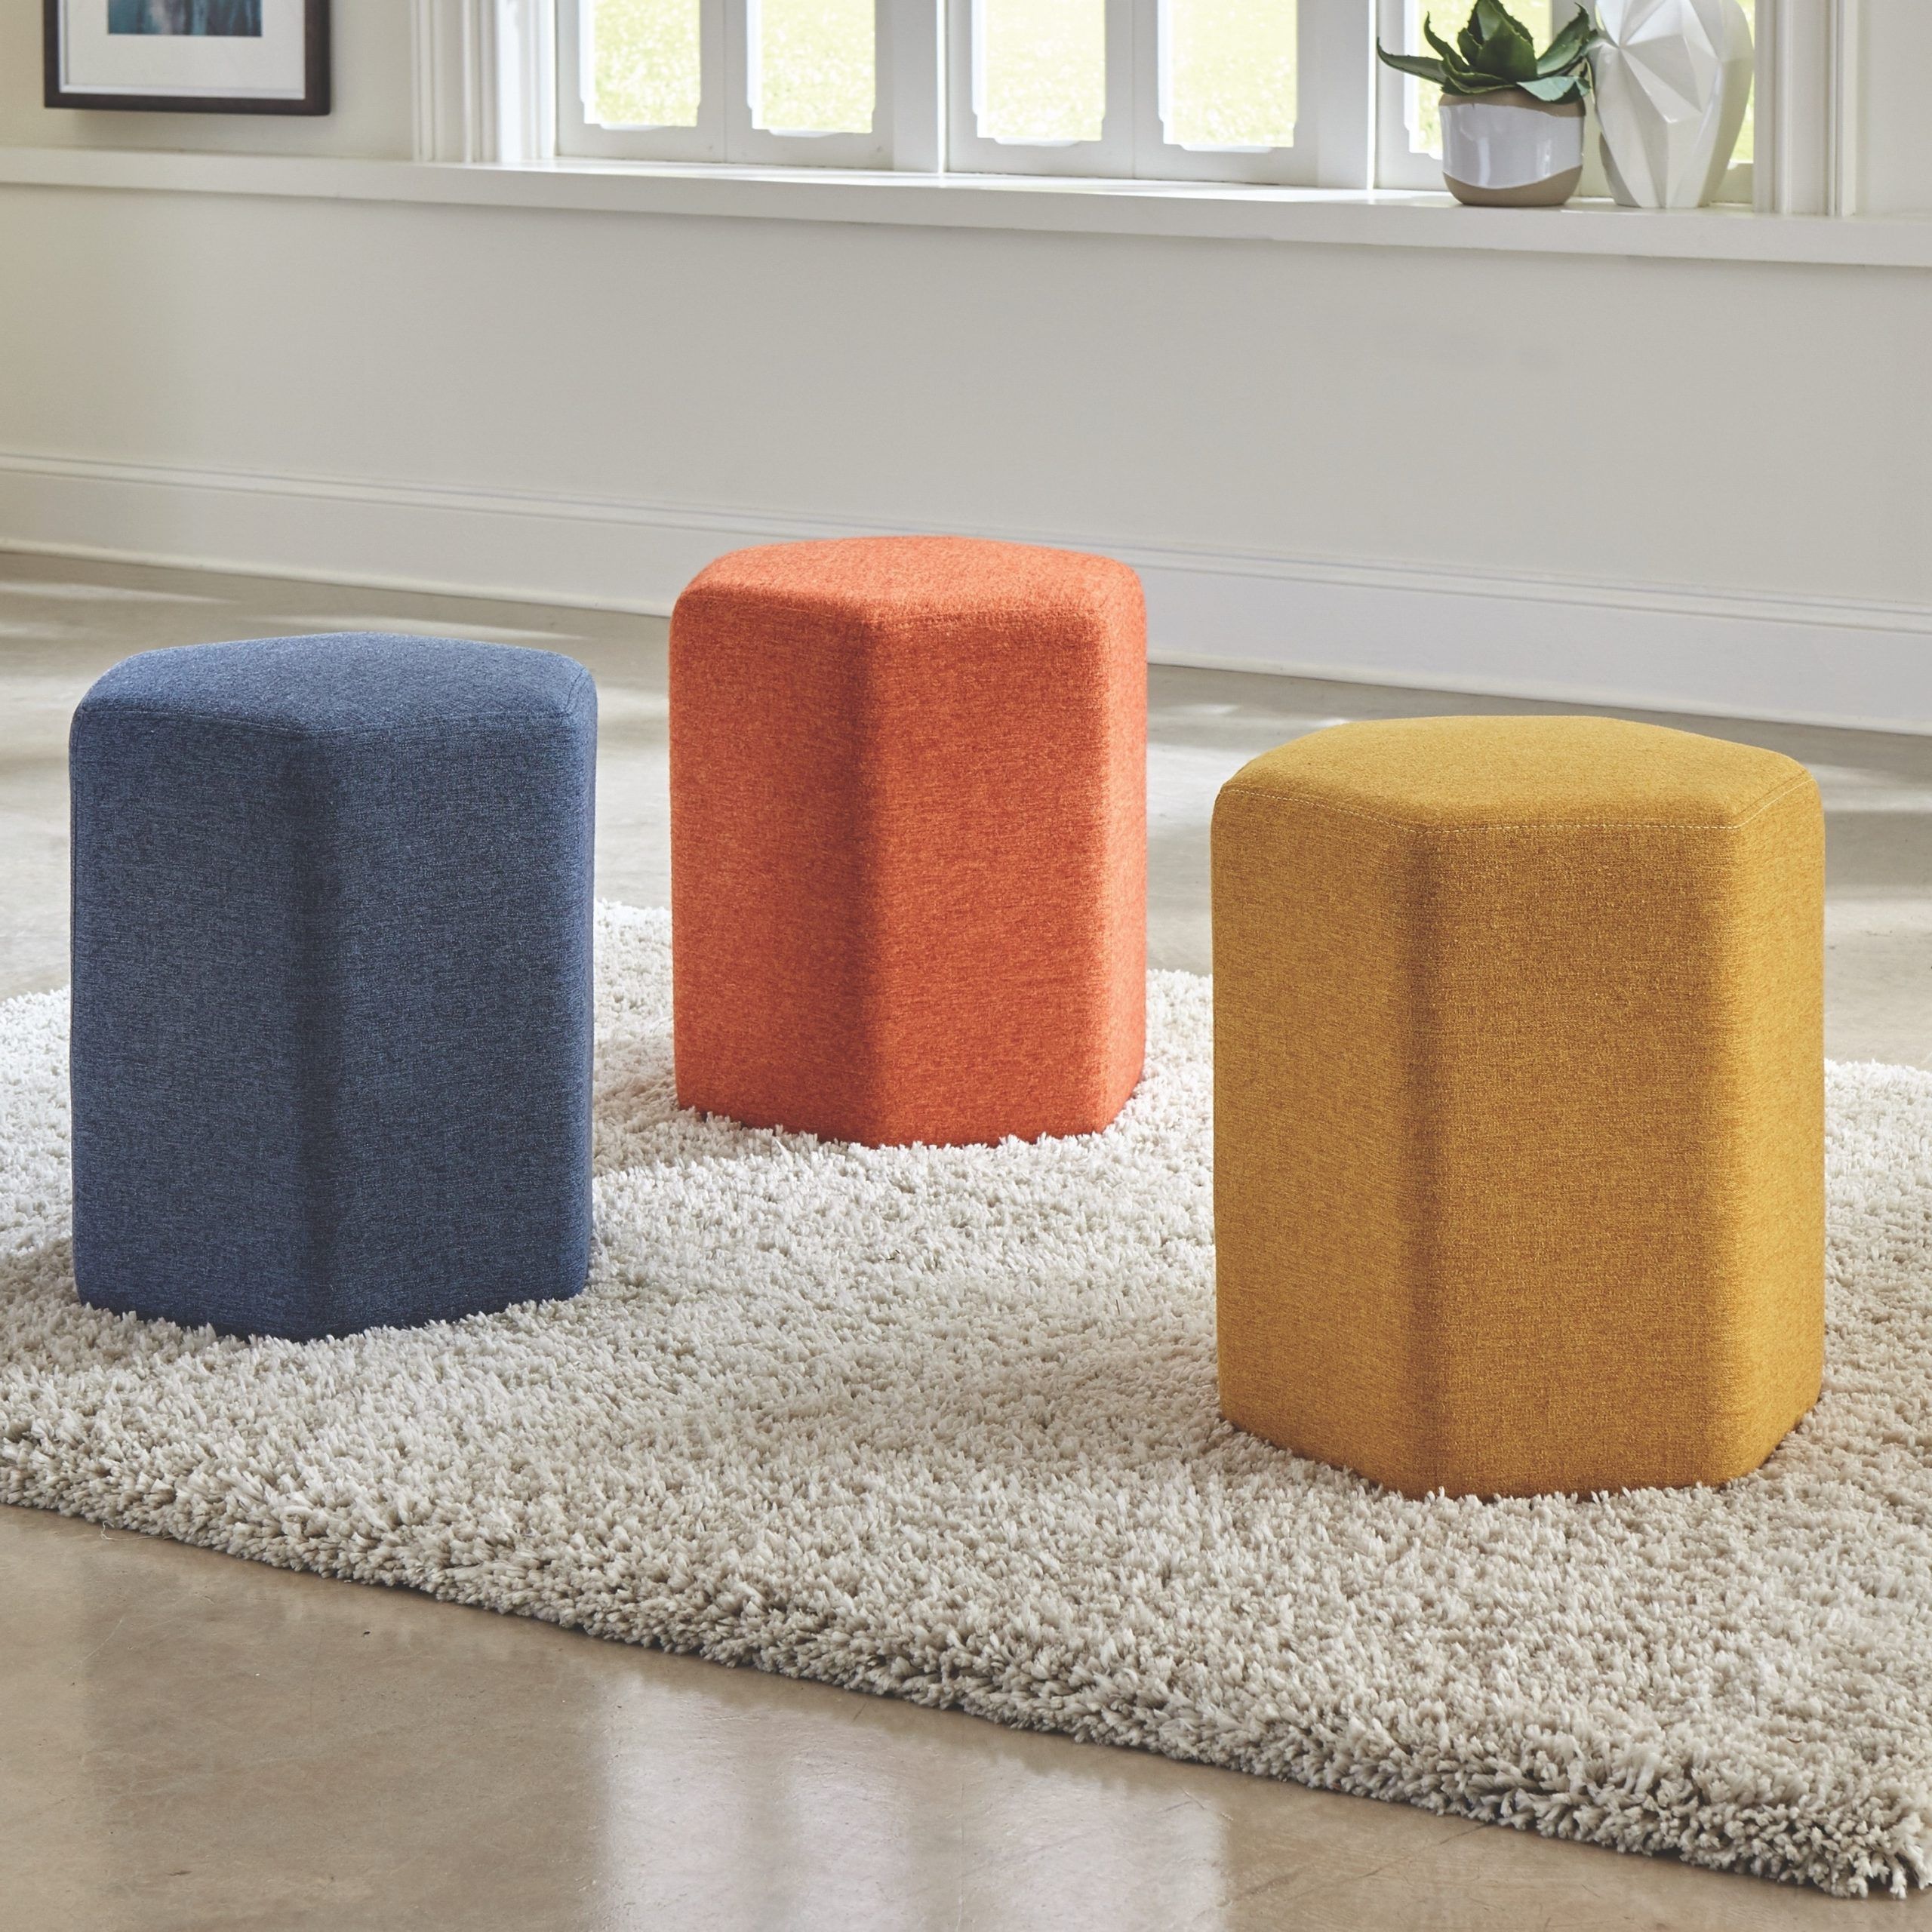 2019 Contemporary Modern Style Hexagon Shaped Ottoman – Overstock – 33906412 With Regard To Hexagon Ottomans (View 2 of 15)